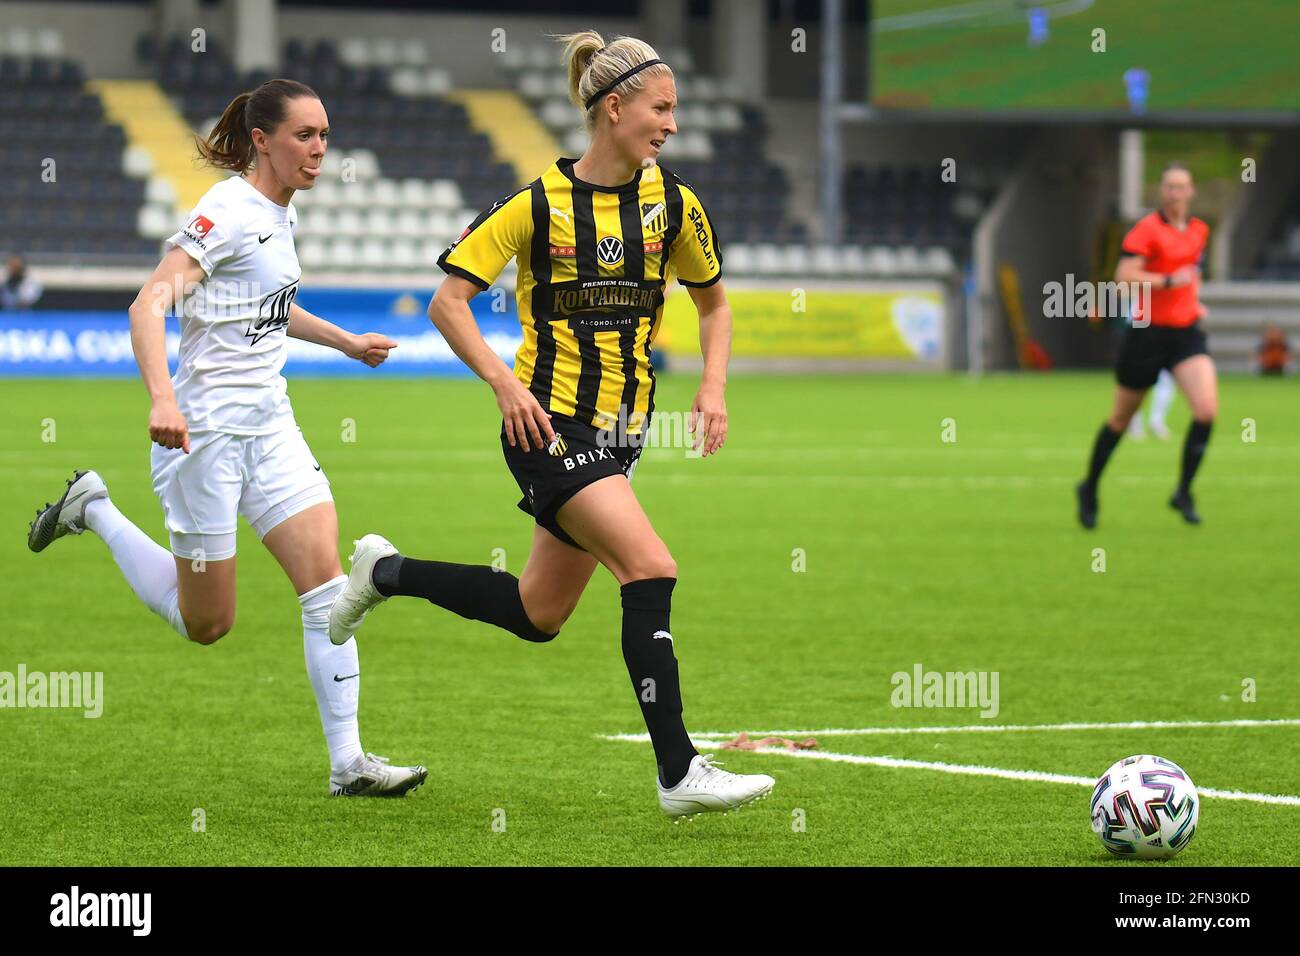 Gothenburg, Sweden. 13th May, 2021. Emma Kullberg (4 Hacken) and Felicia Rogic (16 Eskilstuna) during the final of the Swedish League Cup 2021 on May 13th 2021 between Hacken and Eskilstuna at Bravida Arena in Gothenburg, Sweden Credit: SPP Sport Press Photo. /Alamy Live News Stock Photo